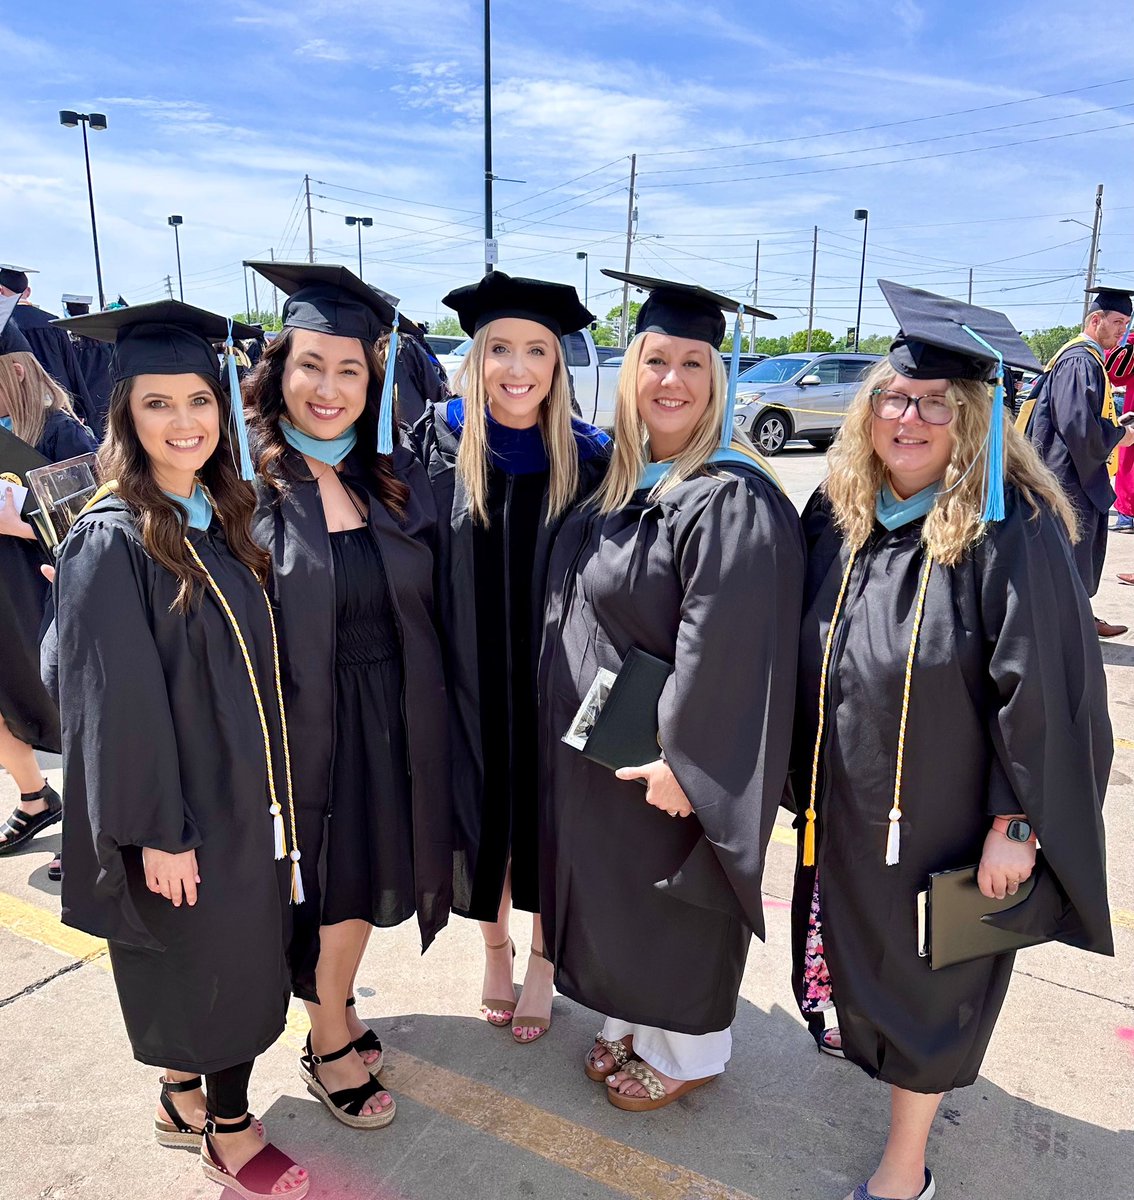 One of my favorite days of the year to be a Shocker! Love these school counseling babies of mine and can’t wait to watch them continue to be world changers! 💛🖤
@IsleWsu
#schoolcounseling #counseloreducation #goshocks #proudprofessor